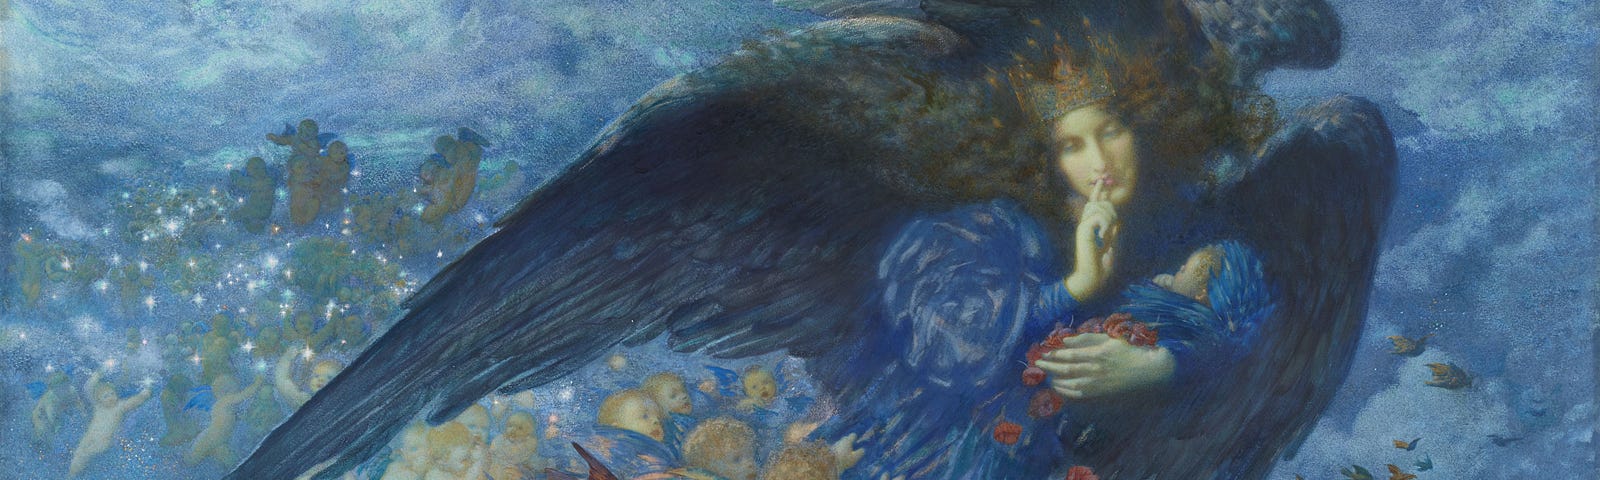 Photo of a painting of a mother angel with many baby angels on mostly a blue background.